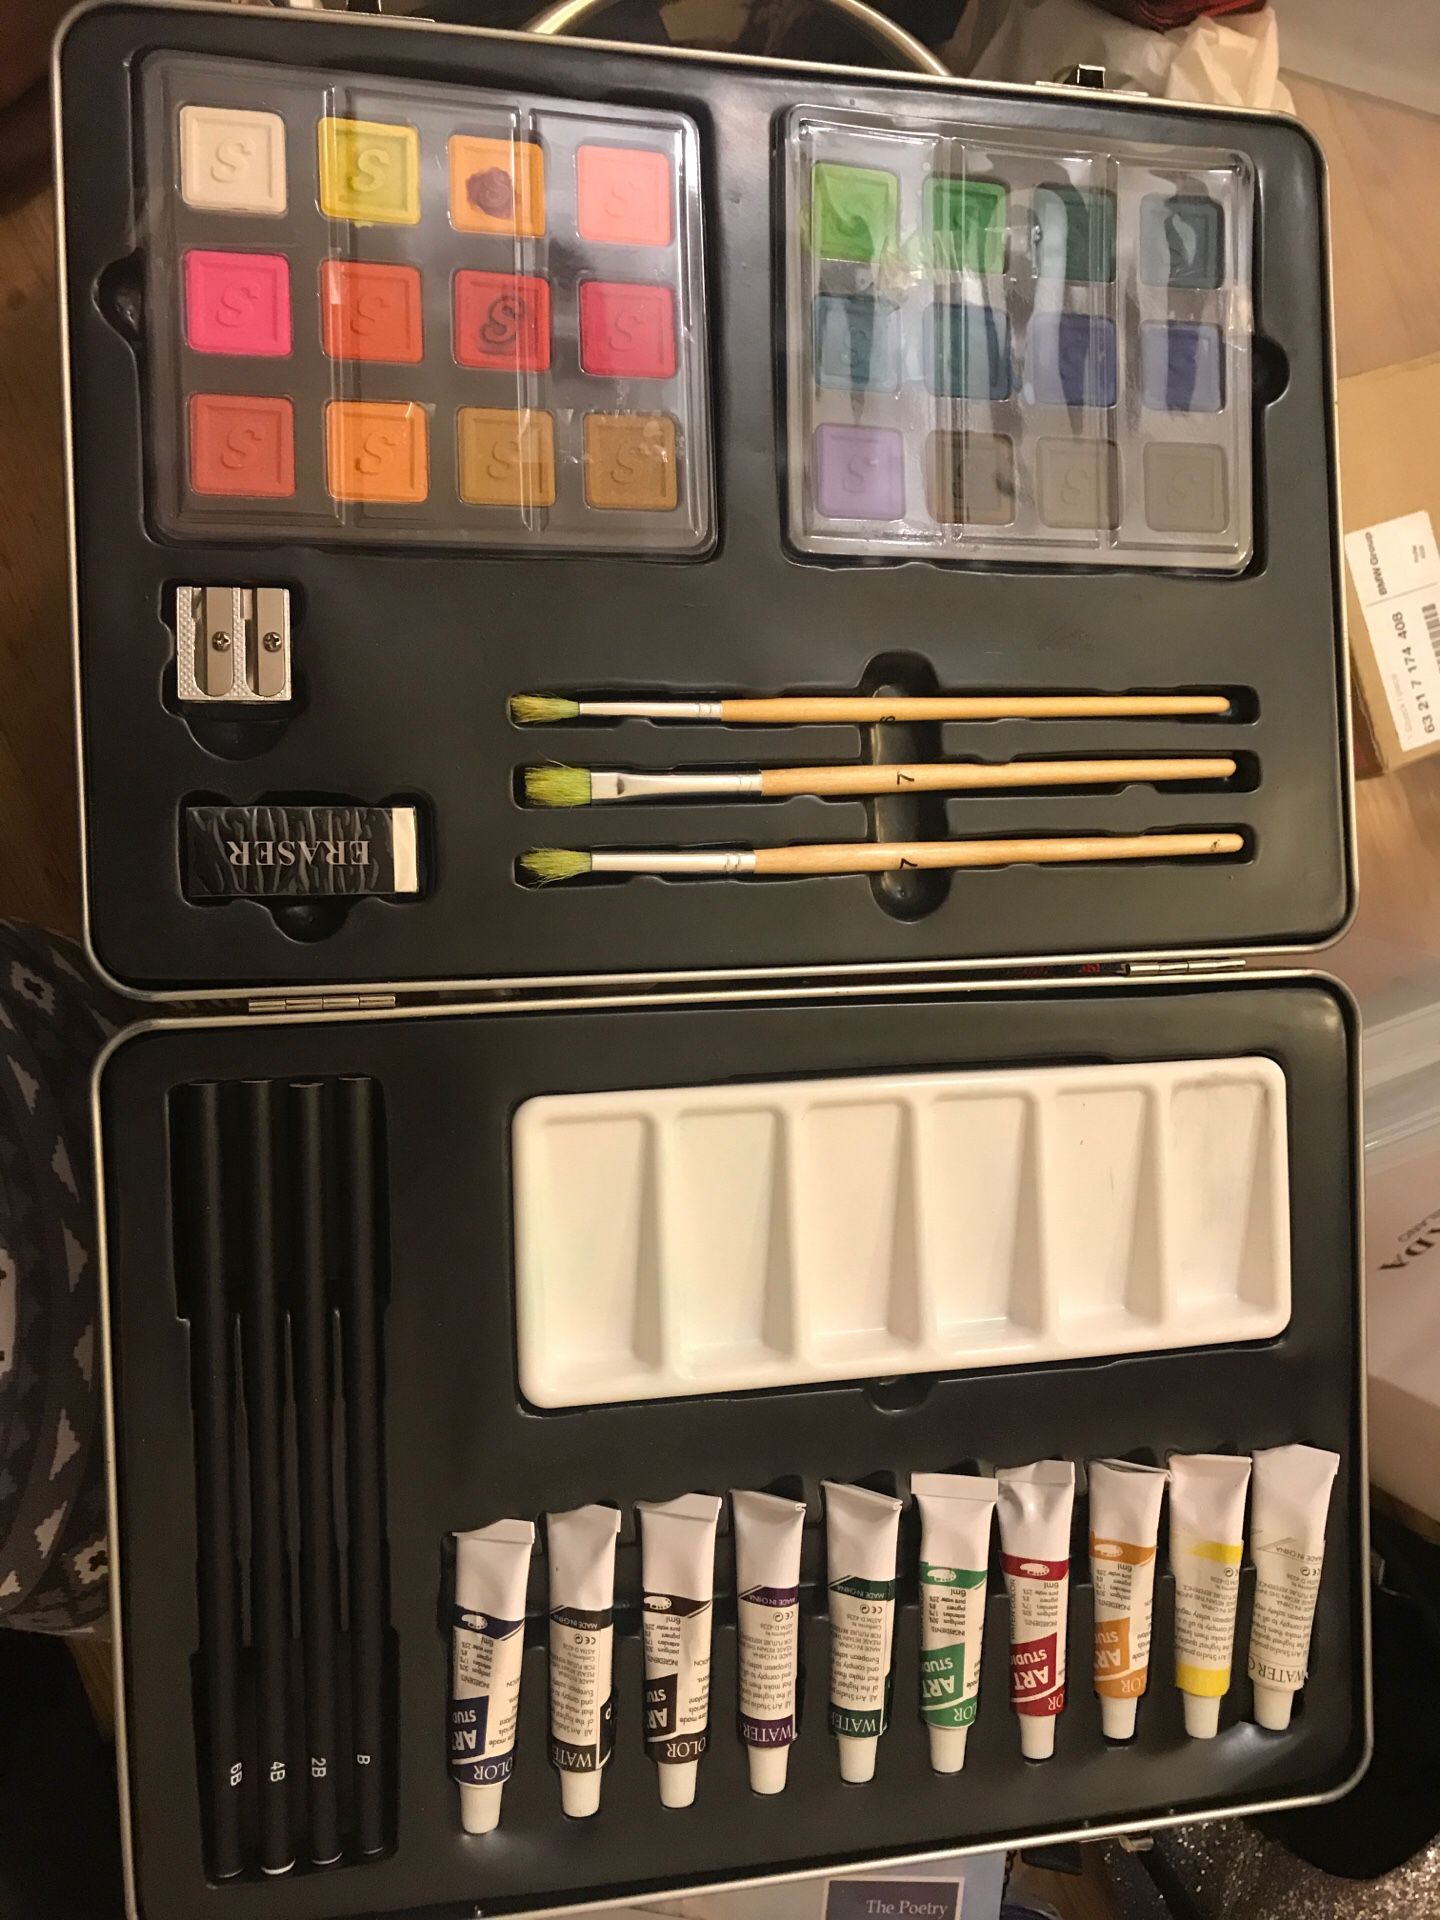 Art set [Good] - this whole set is only $8 now :)